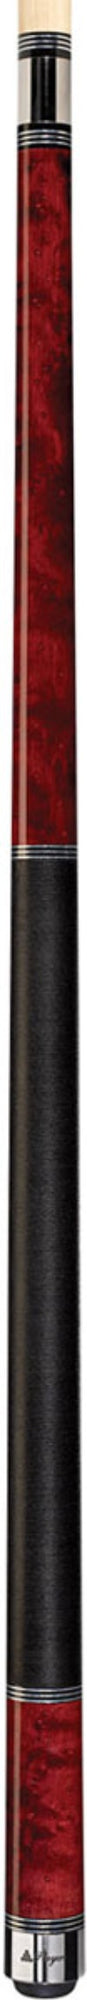 Players Players C-960 Pool Cue Pool Cue